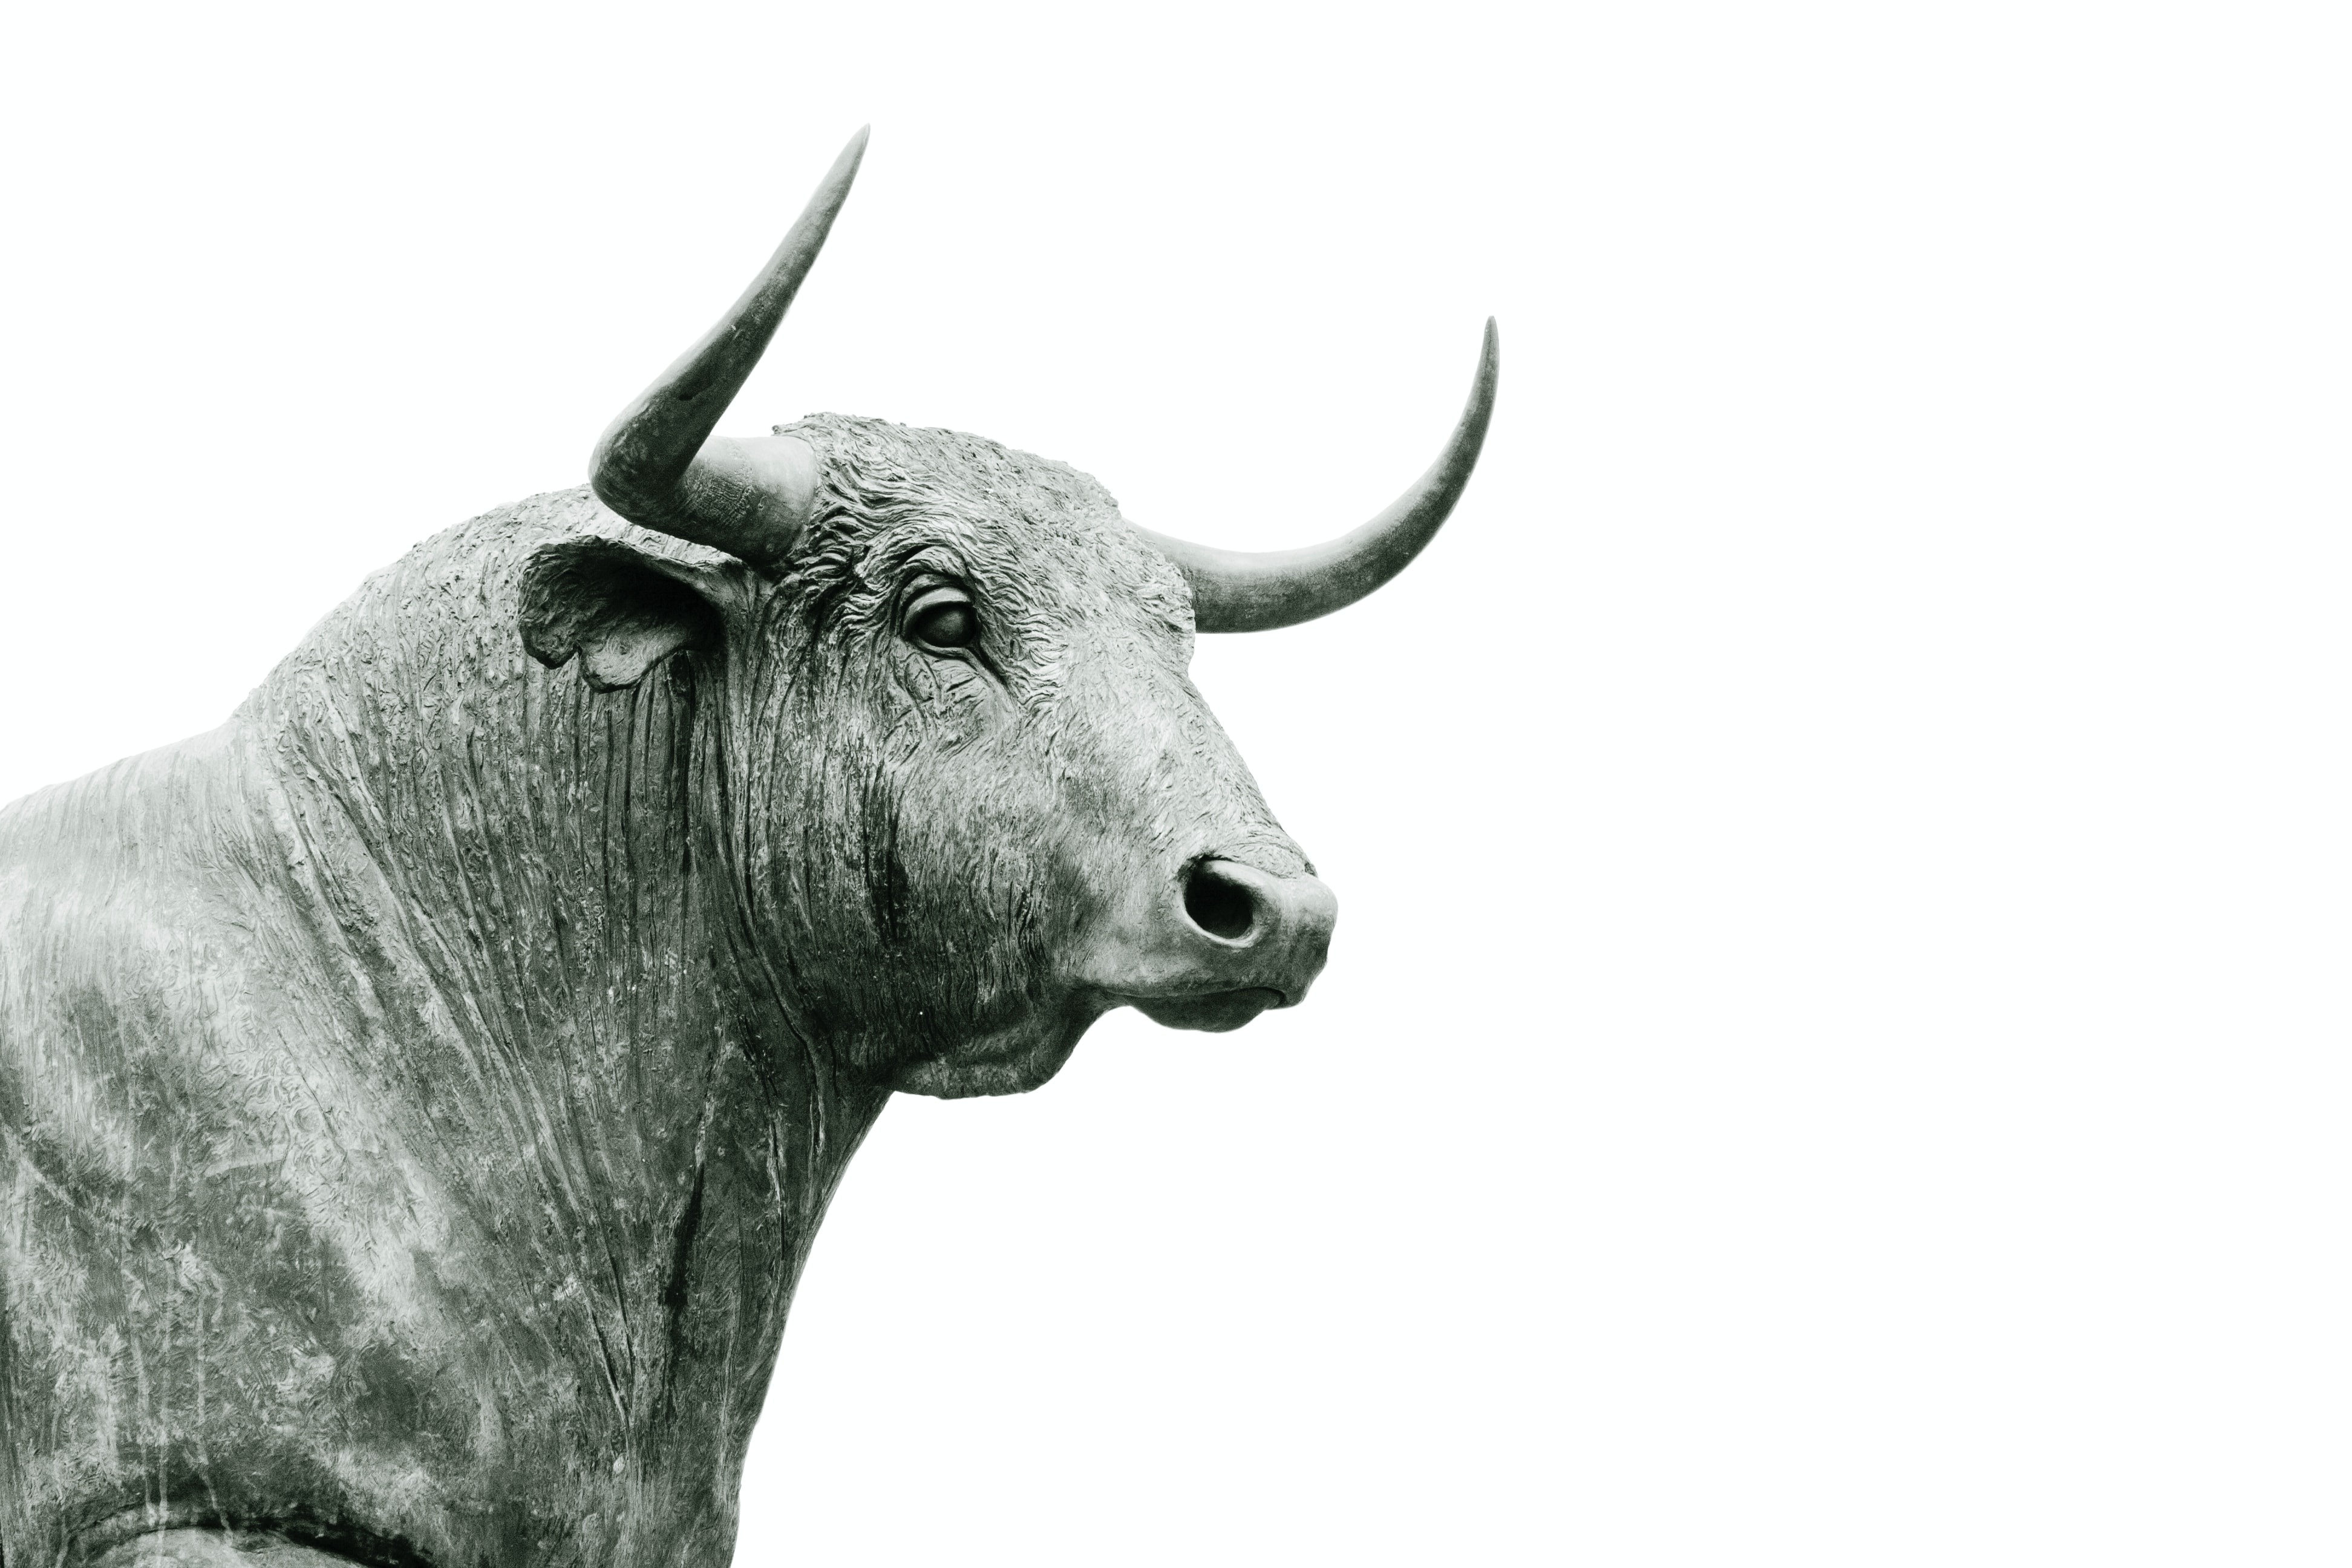 Don’t Follow the Herd—A Contrarian View of Our Economic Condition